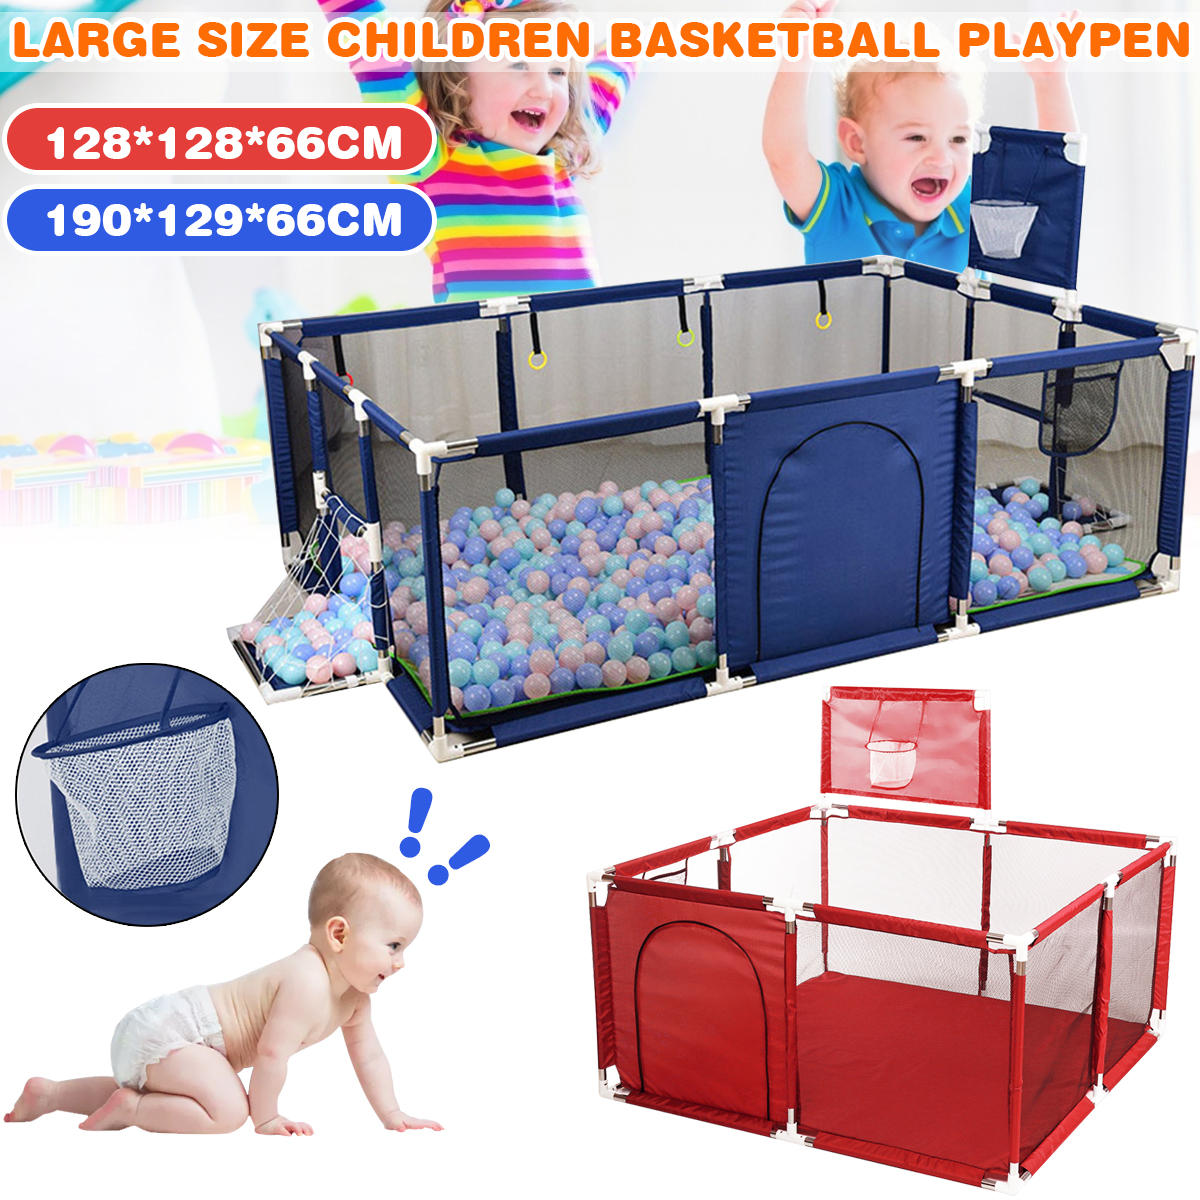 Comomy-Playpen-180-x-122-cm-for-Baby-Playpen-Foldable-Safety-Barrier-Play-Tent-Playpen-Baby-Portable-1973980-1